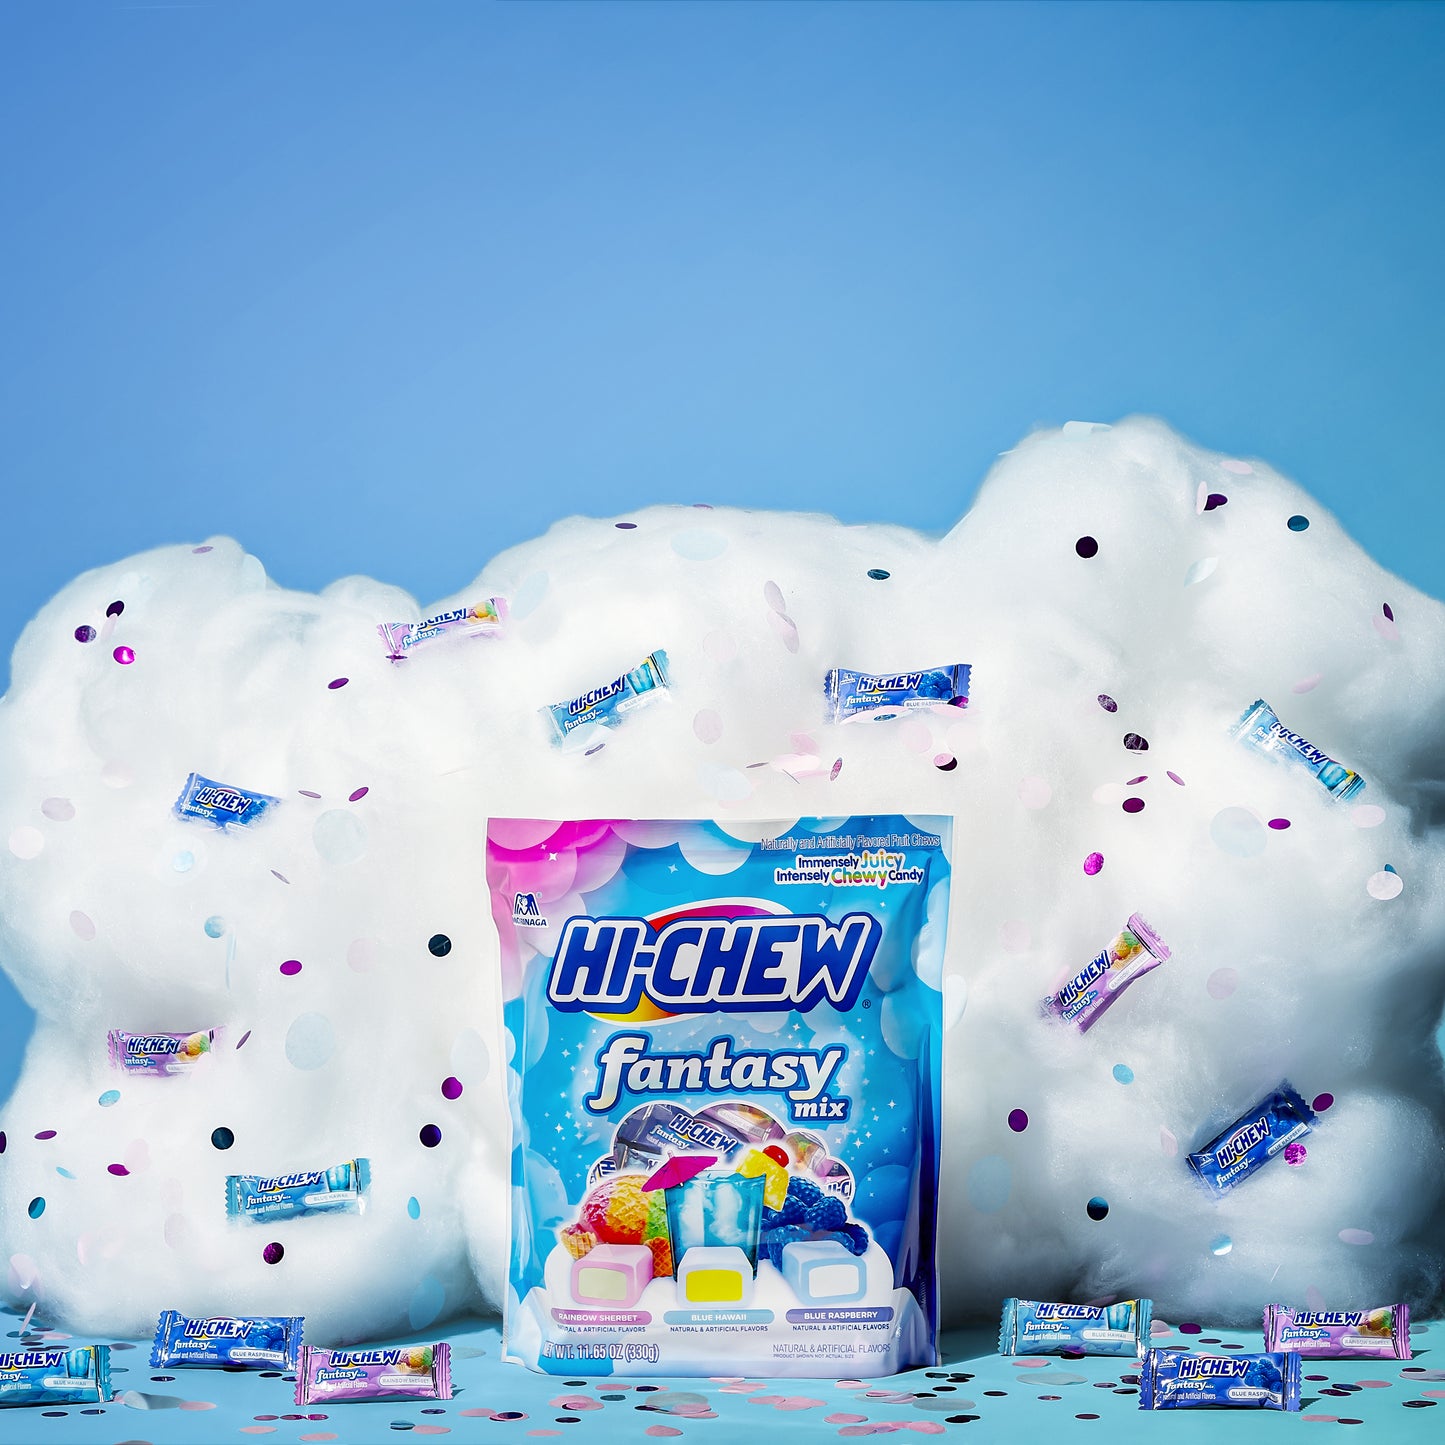 HI-CHEW Fantasy Mix Stand Up Pouch